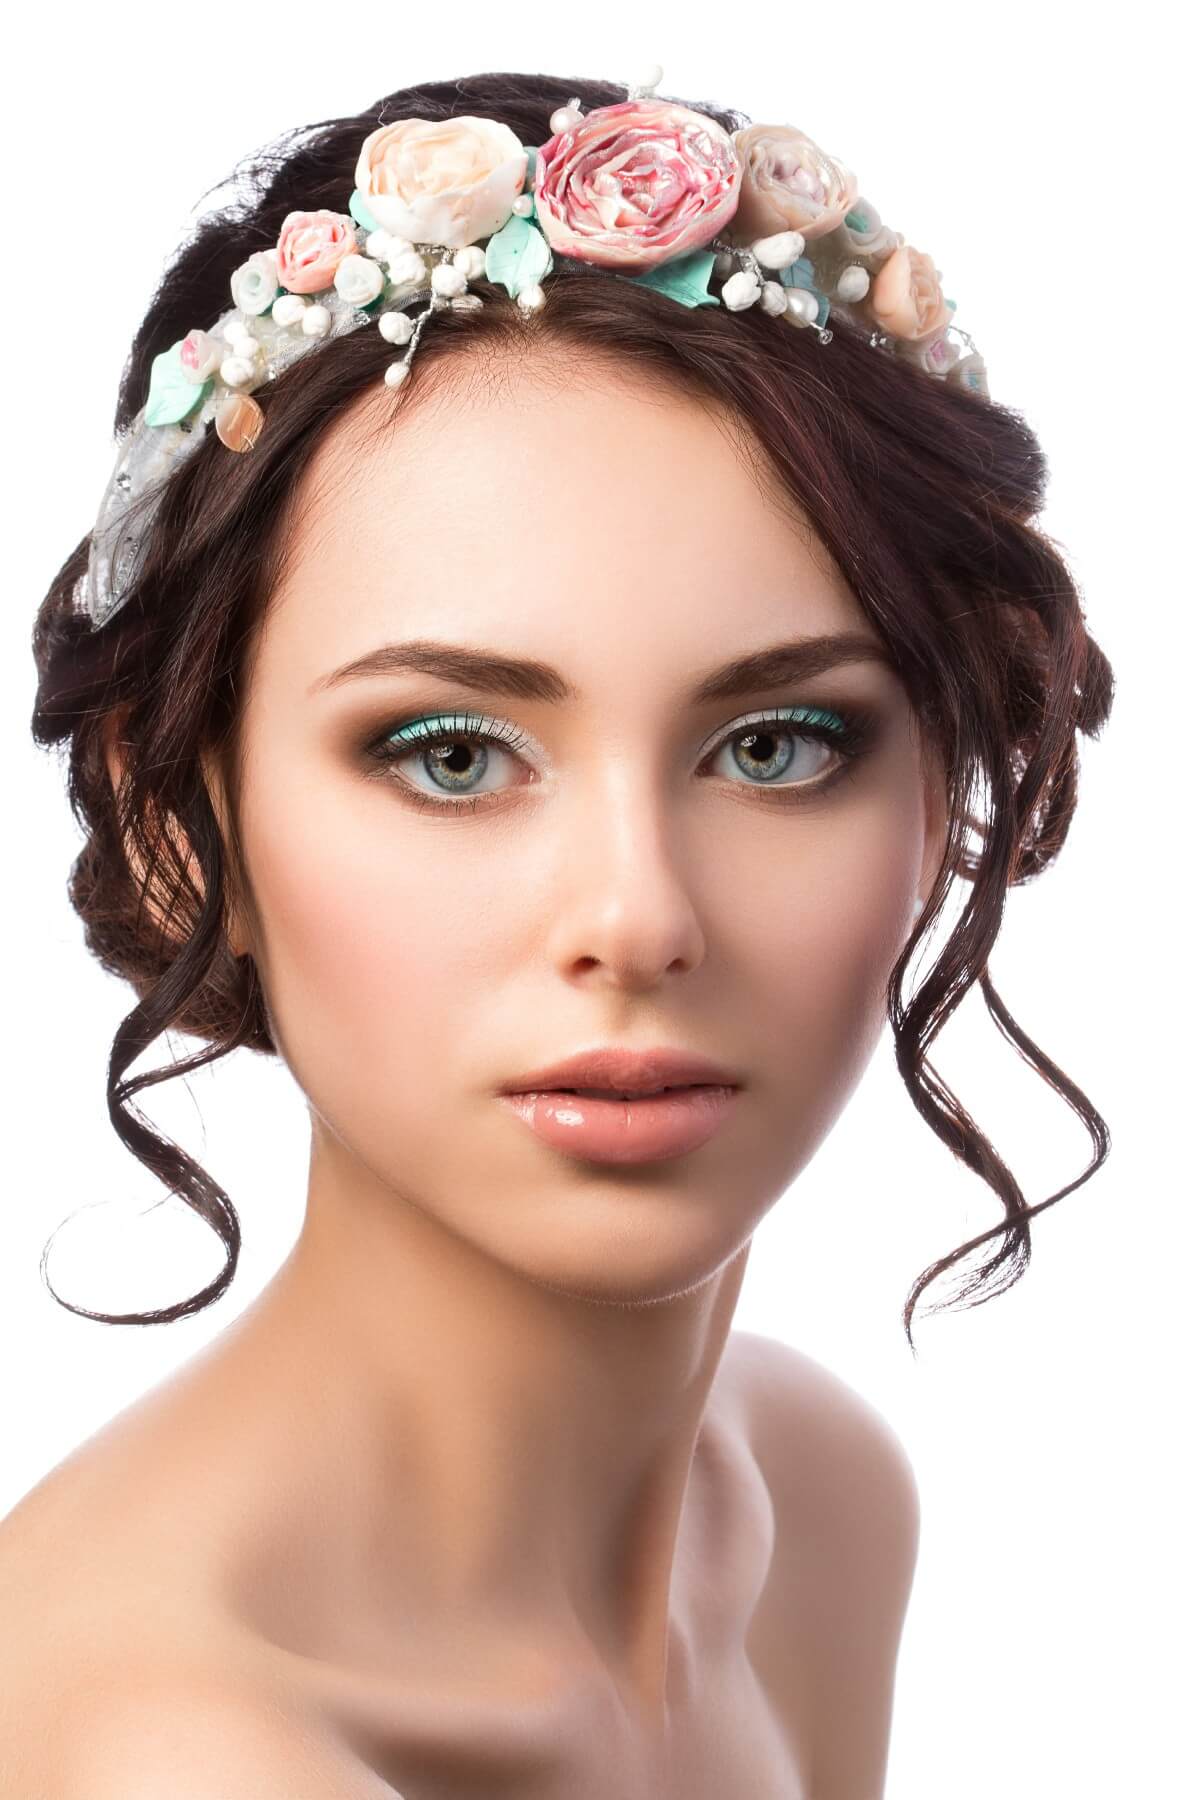 An Elegant Bridal Look with Shimmery Eyes and Flower Crown